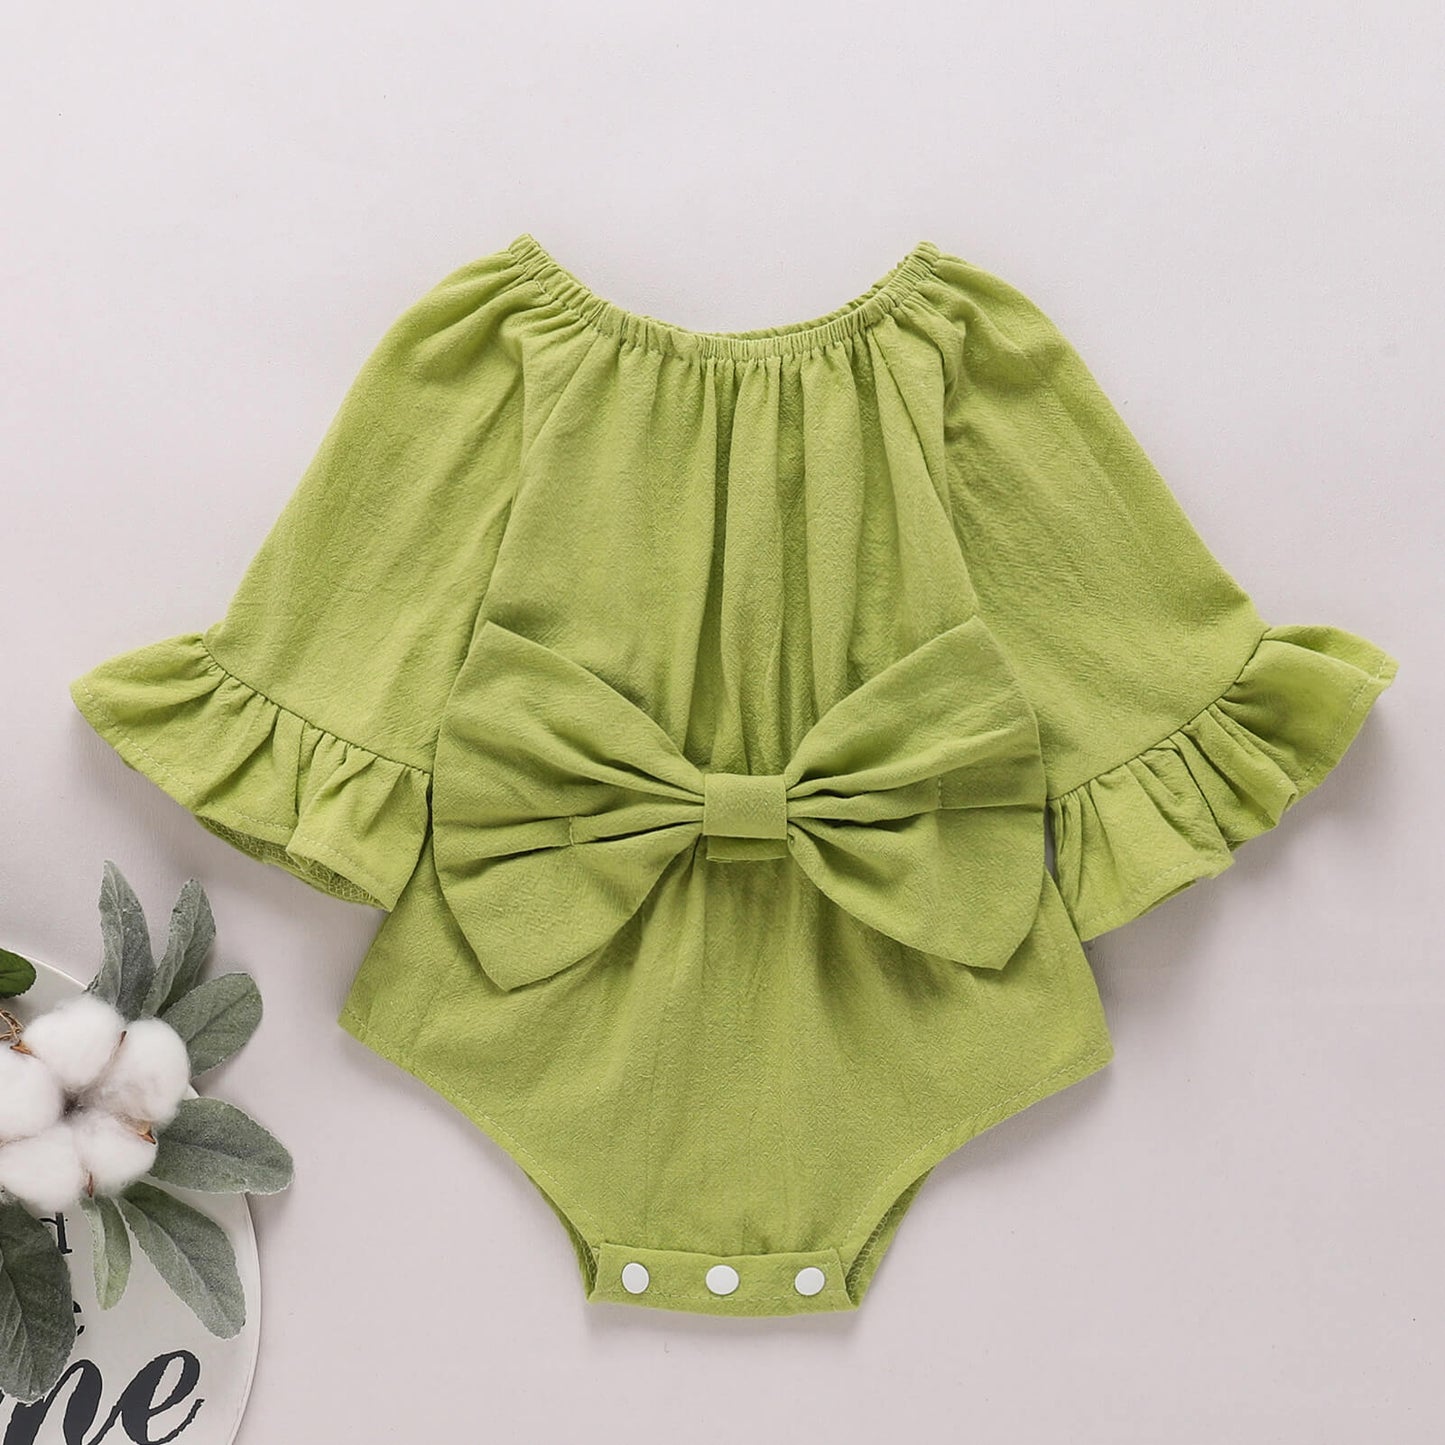 Baby Girl Green Summer Bodysuit with Adorable Bow